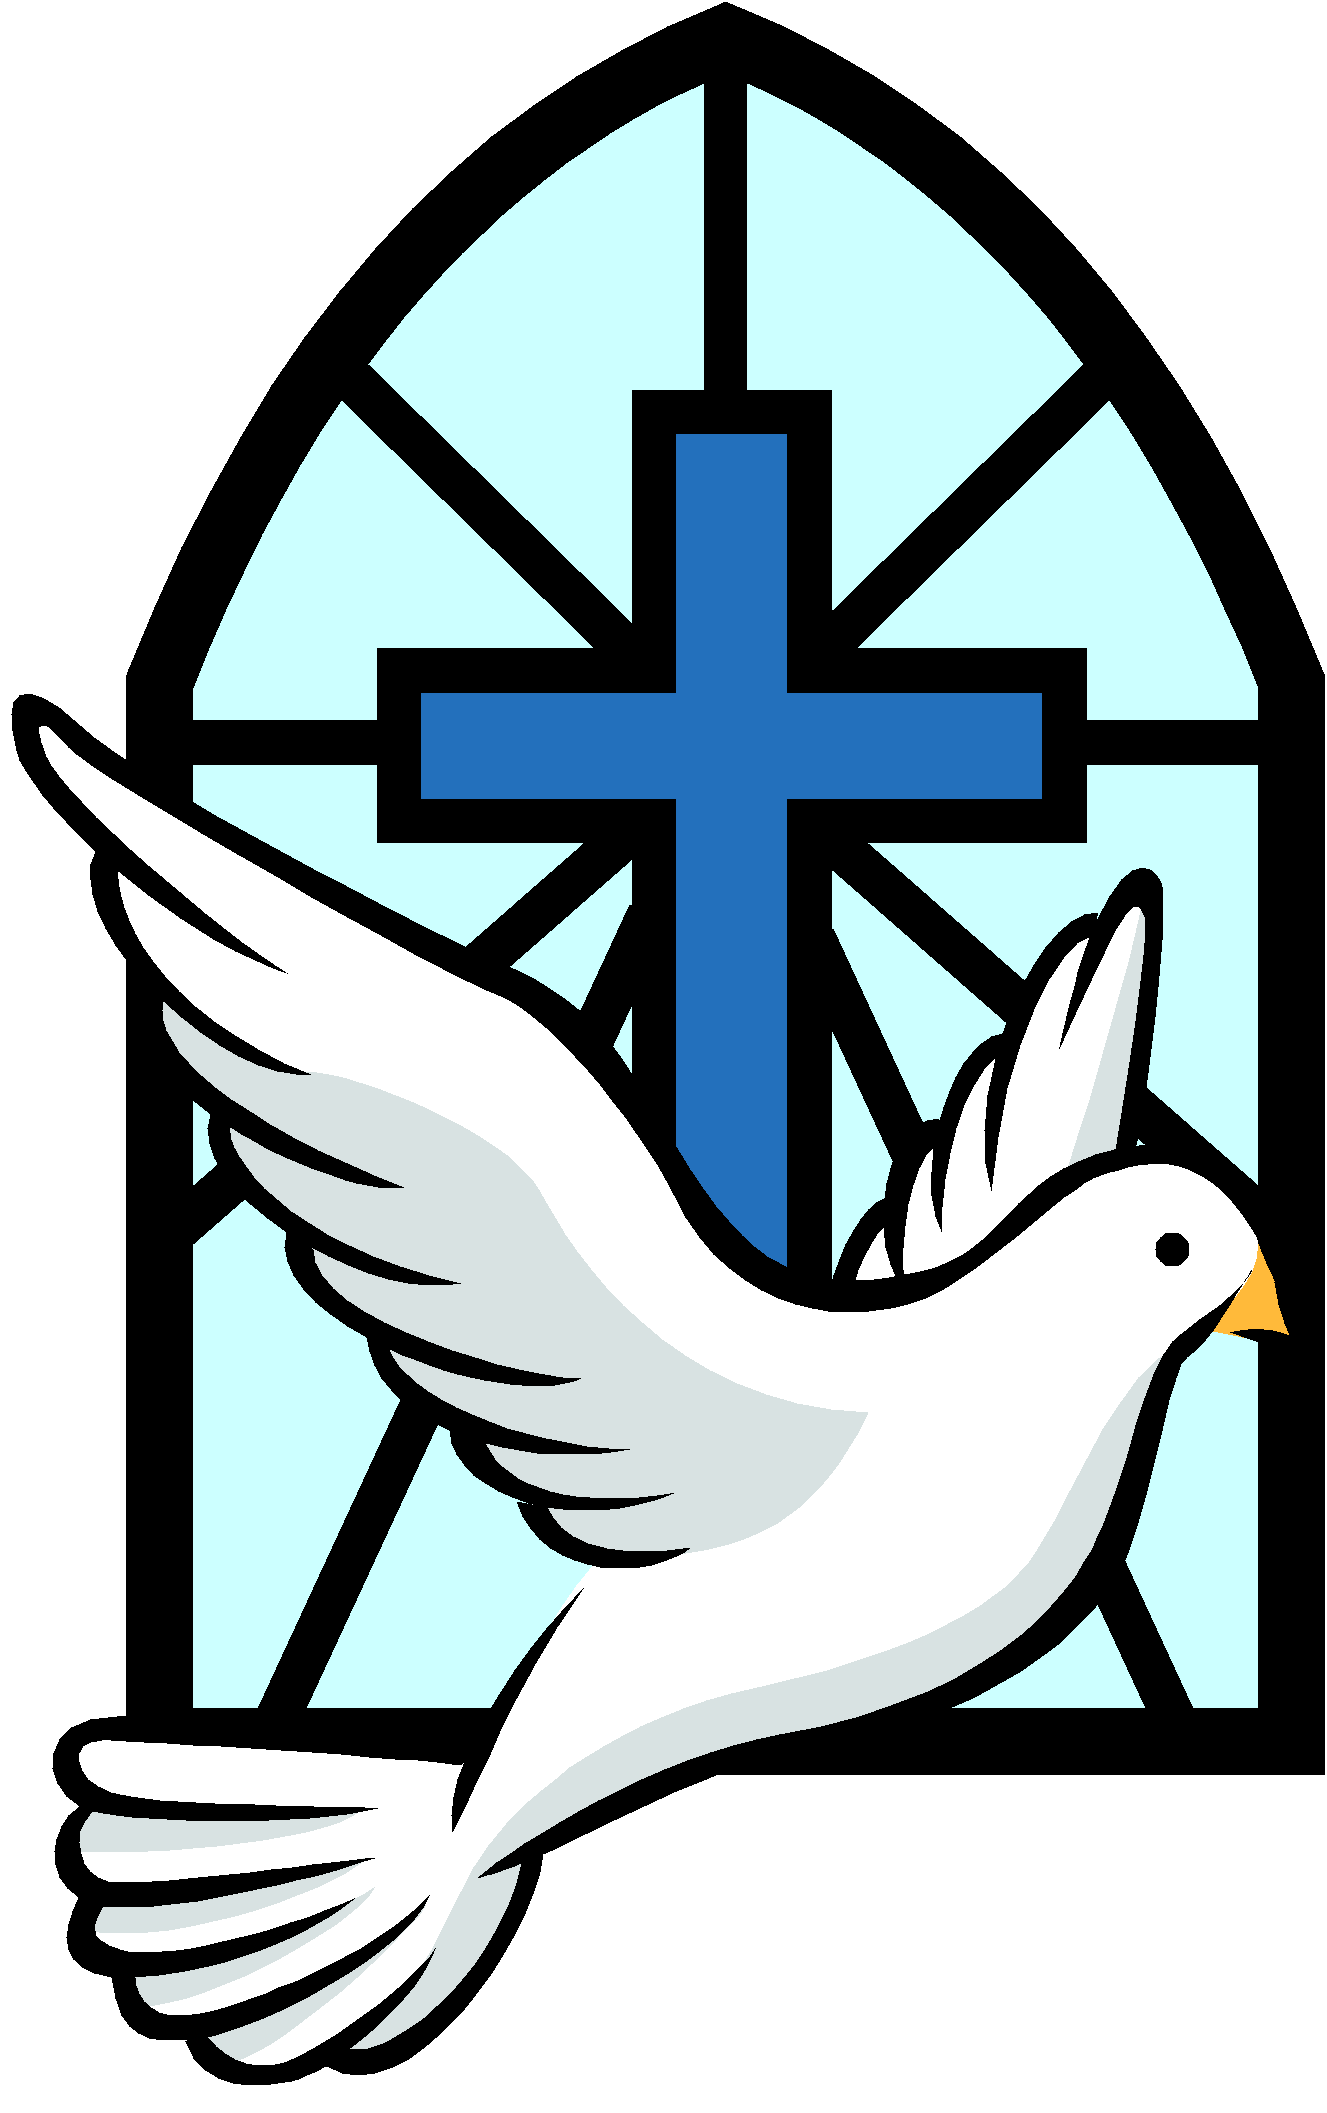 Dove and cross clipart 